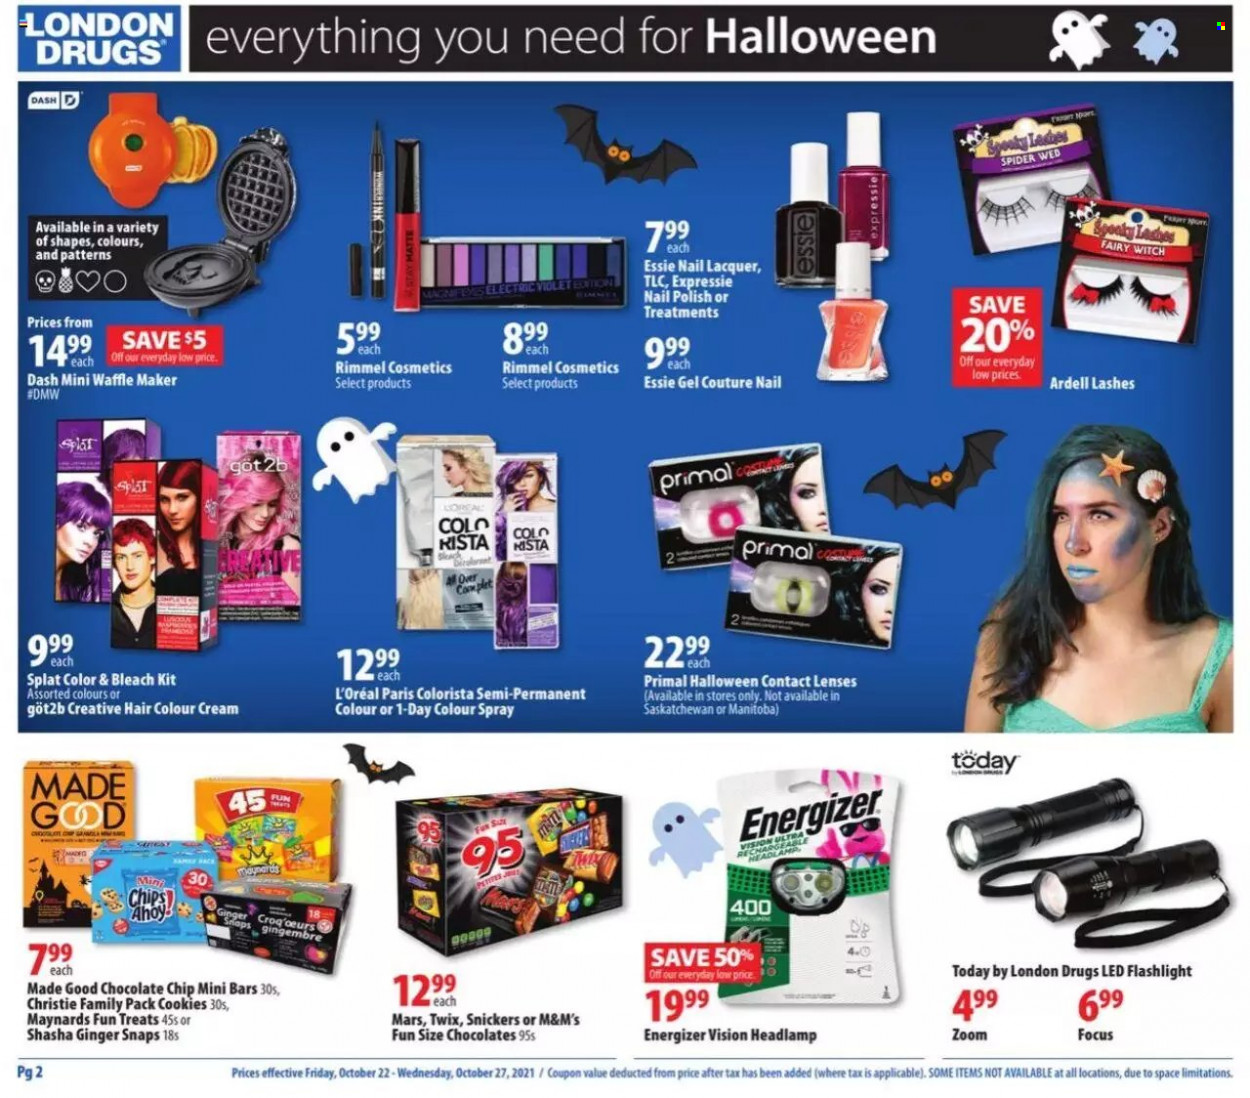 thumbnail - London Drugs Flyer - October 22, 2021 - October 27, 2021 - Sales products - cookies, Snickers, Twix, Mars, Fairy, L’Oréal, hair color, polish, Rimmel, lenses, waffle maker, Halloween, contact lenses, Energizer, chips, M&M's. Page 2.